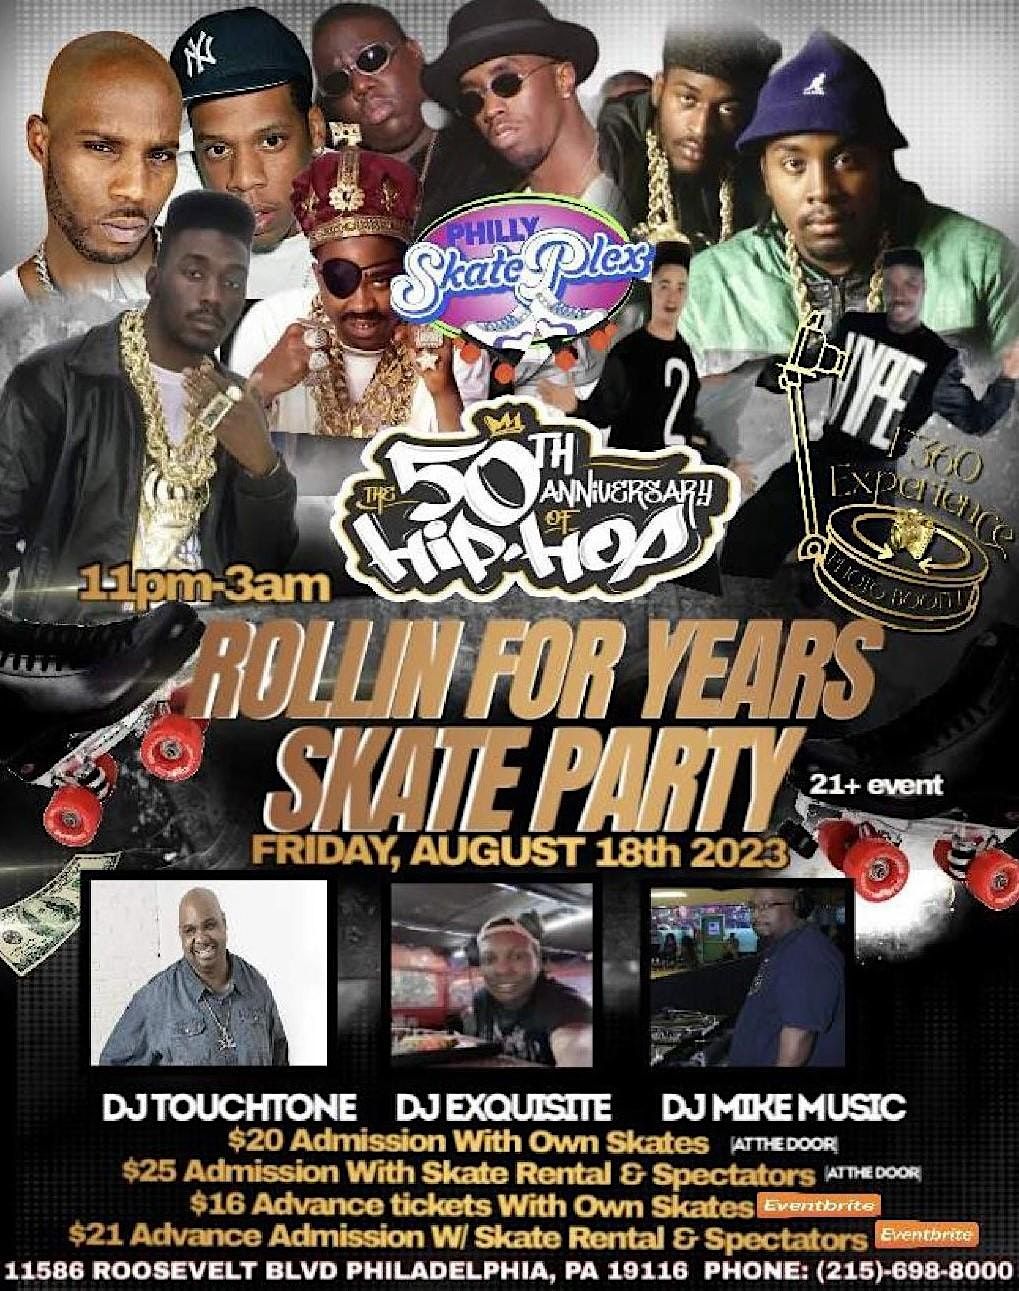 50th Anniversary of Hip Hop Skate Party